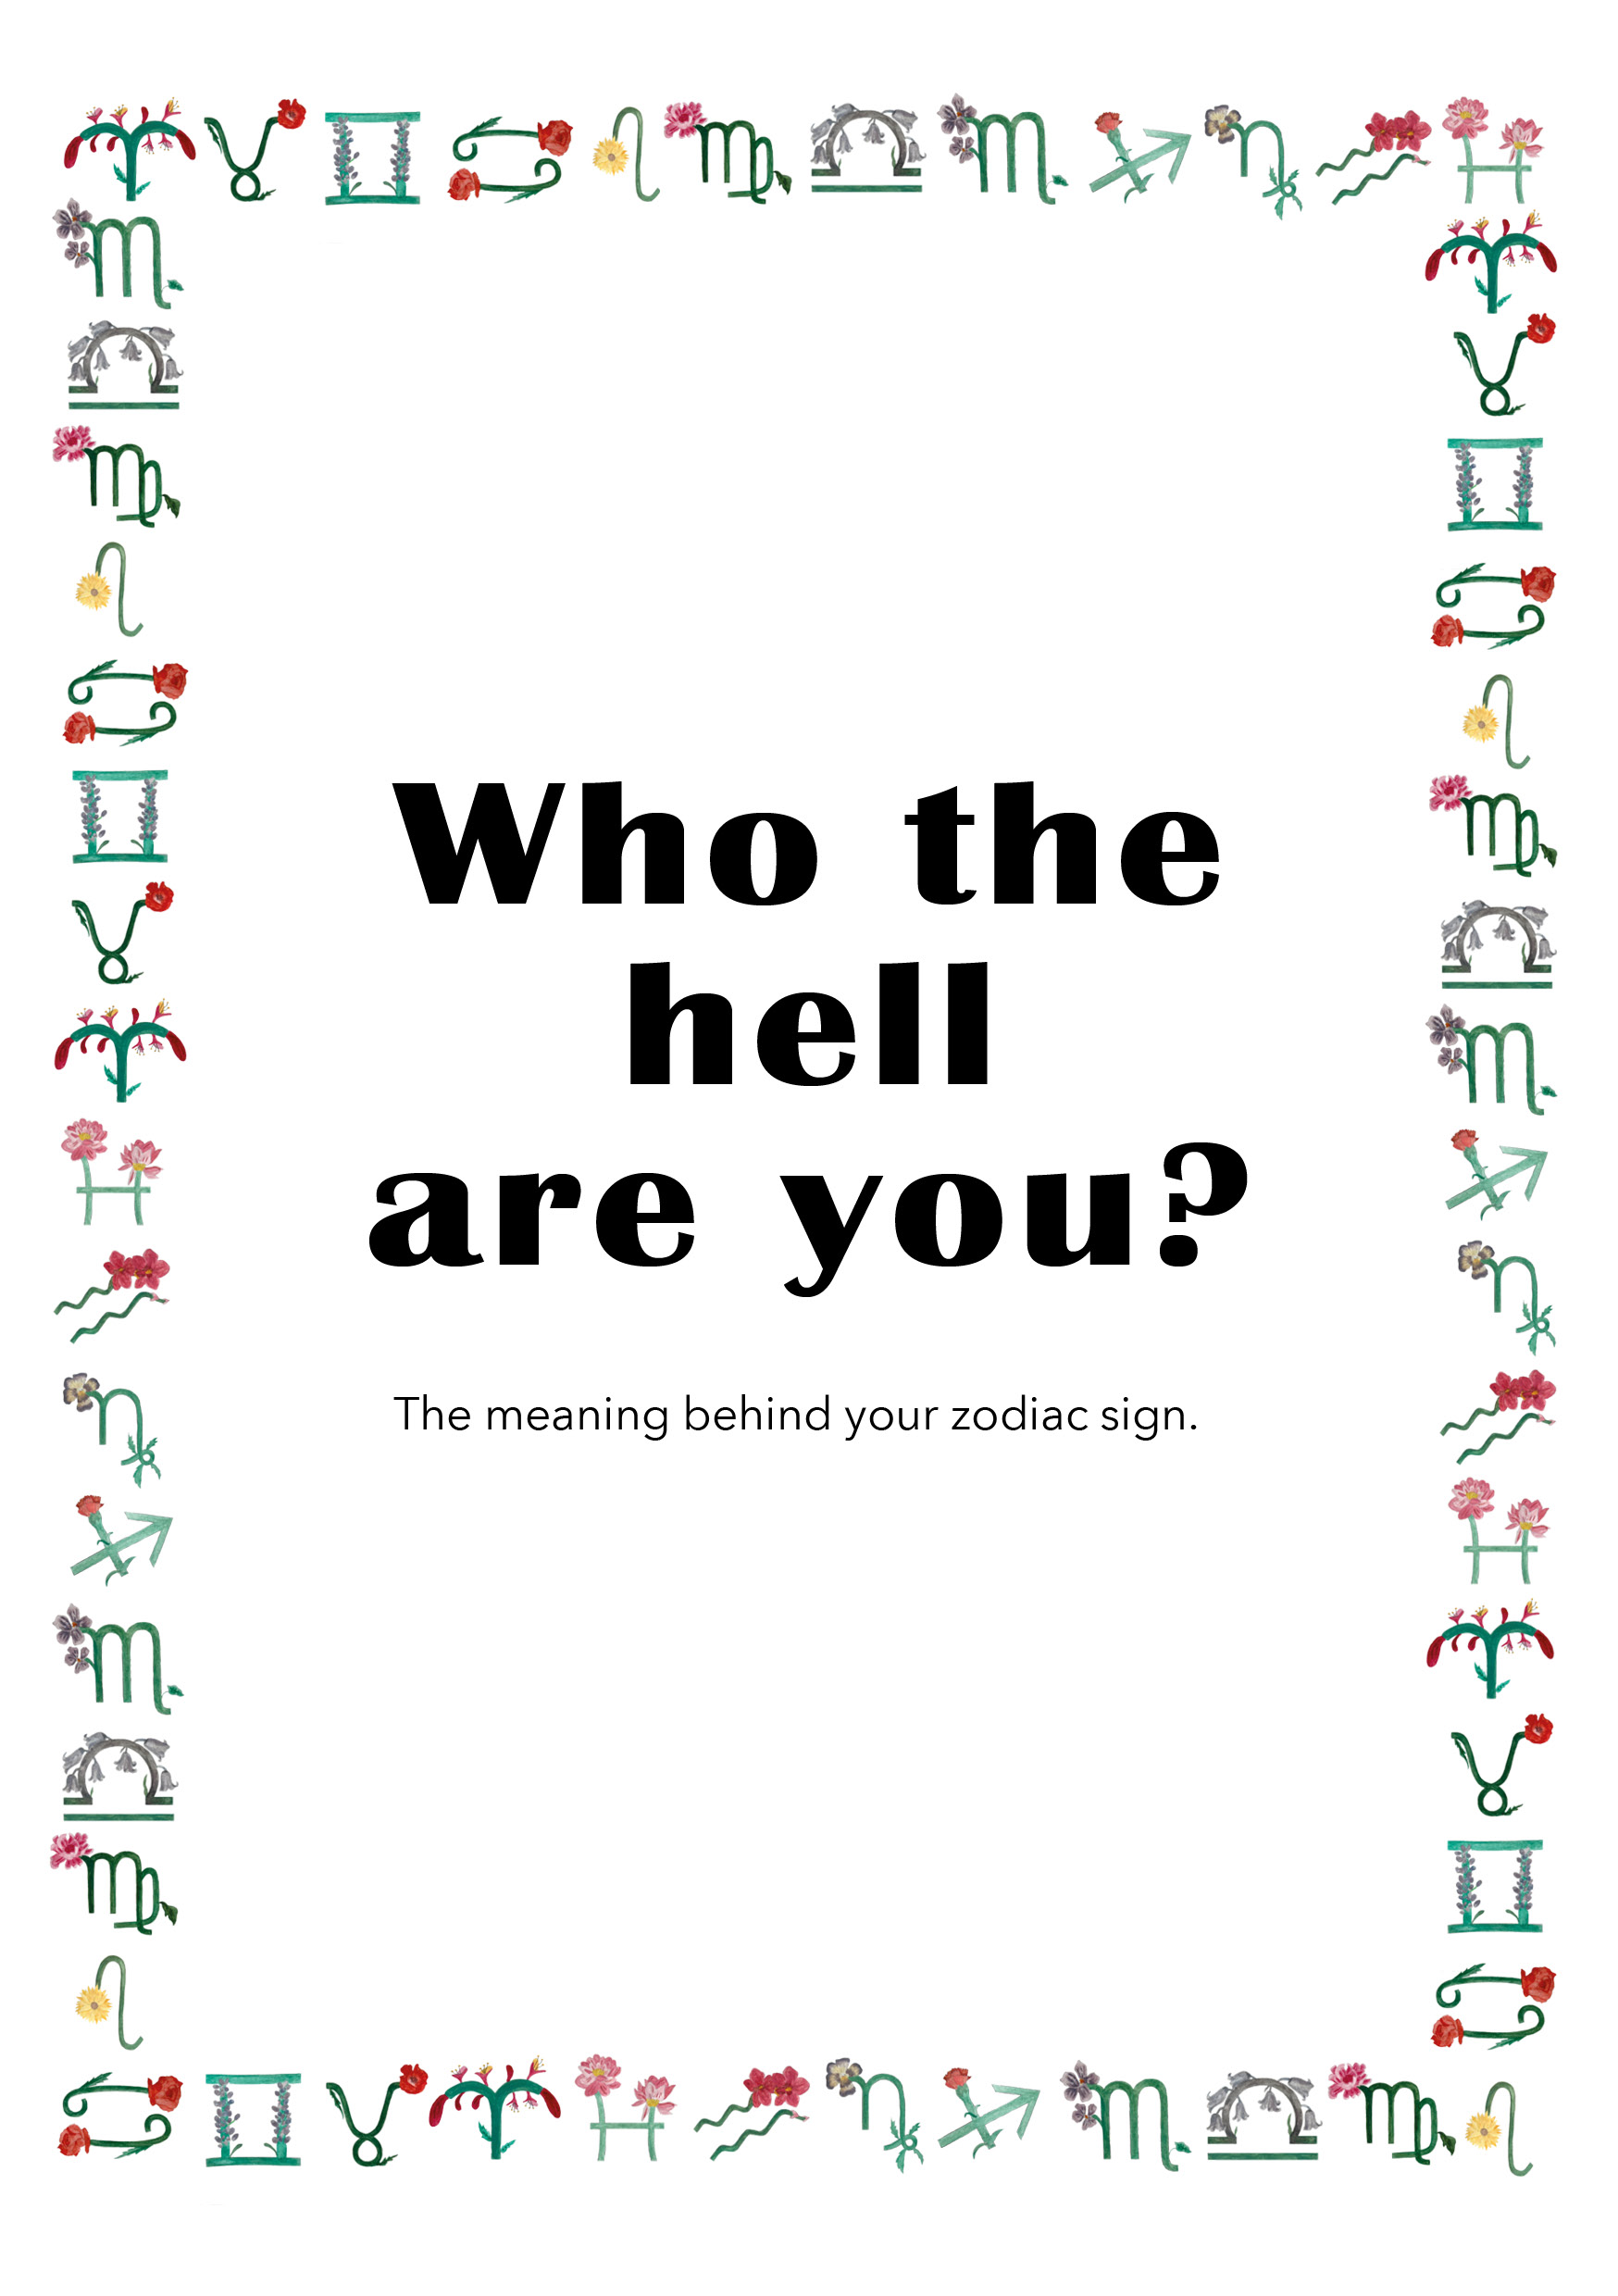 BA Illustration work by Amelia Spalding showing the title of the booklet, 'Who the hell are you? 'and a border of the zodiac signs and their flowers.